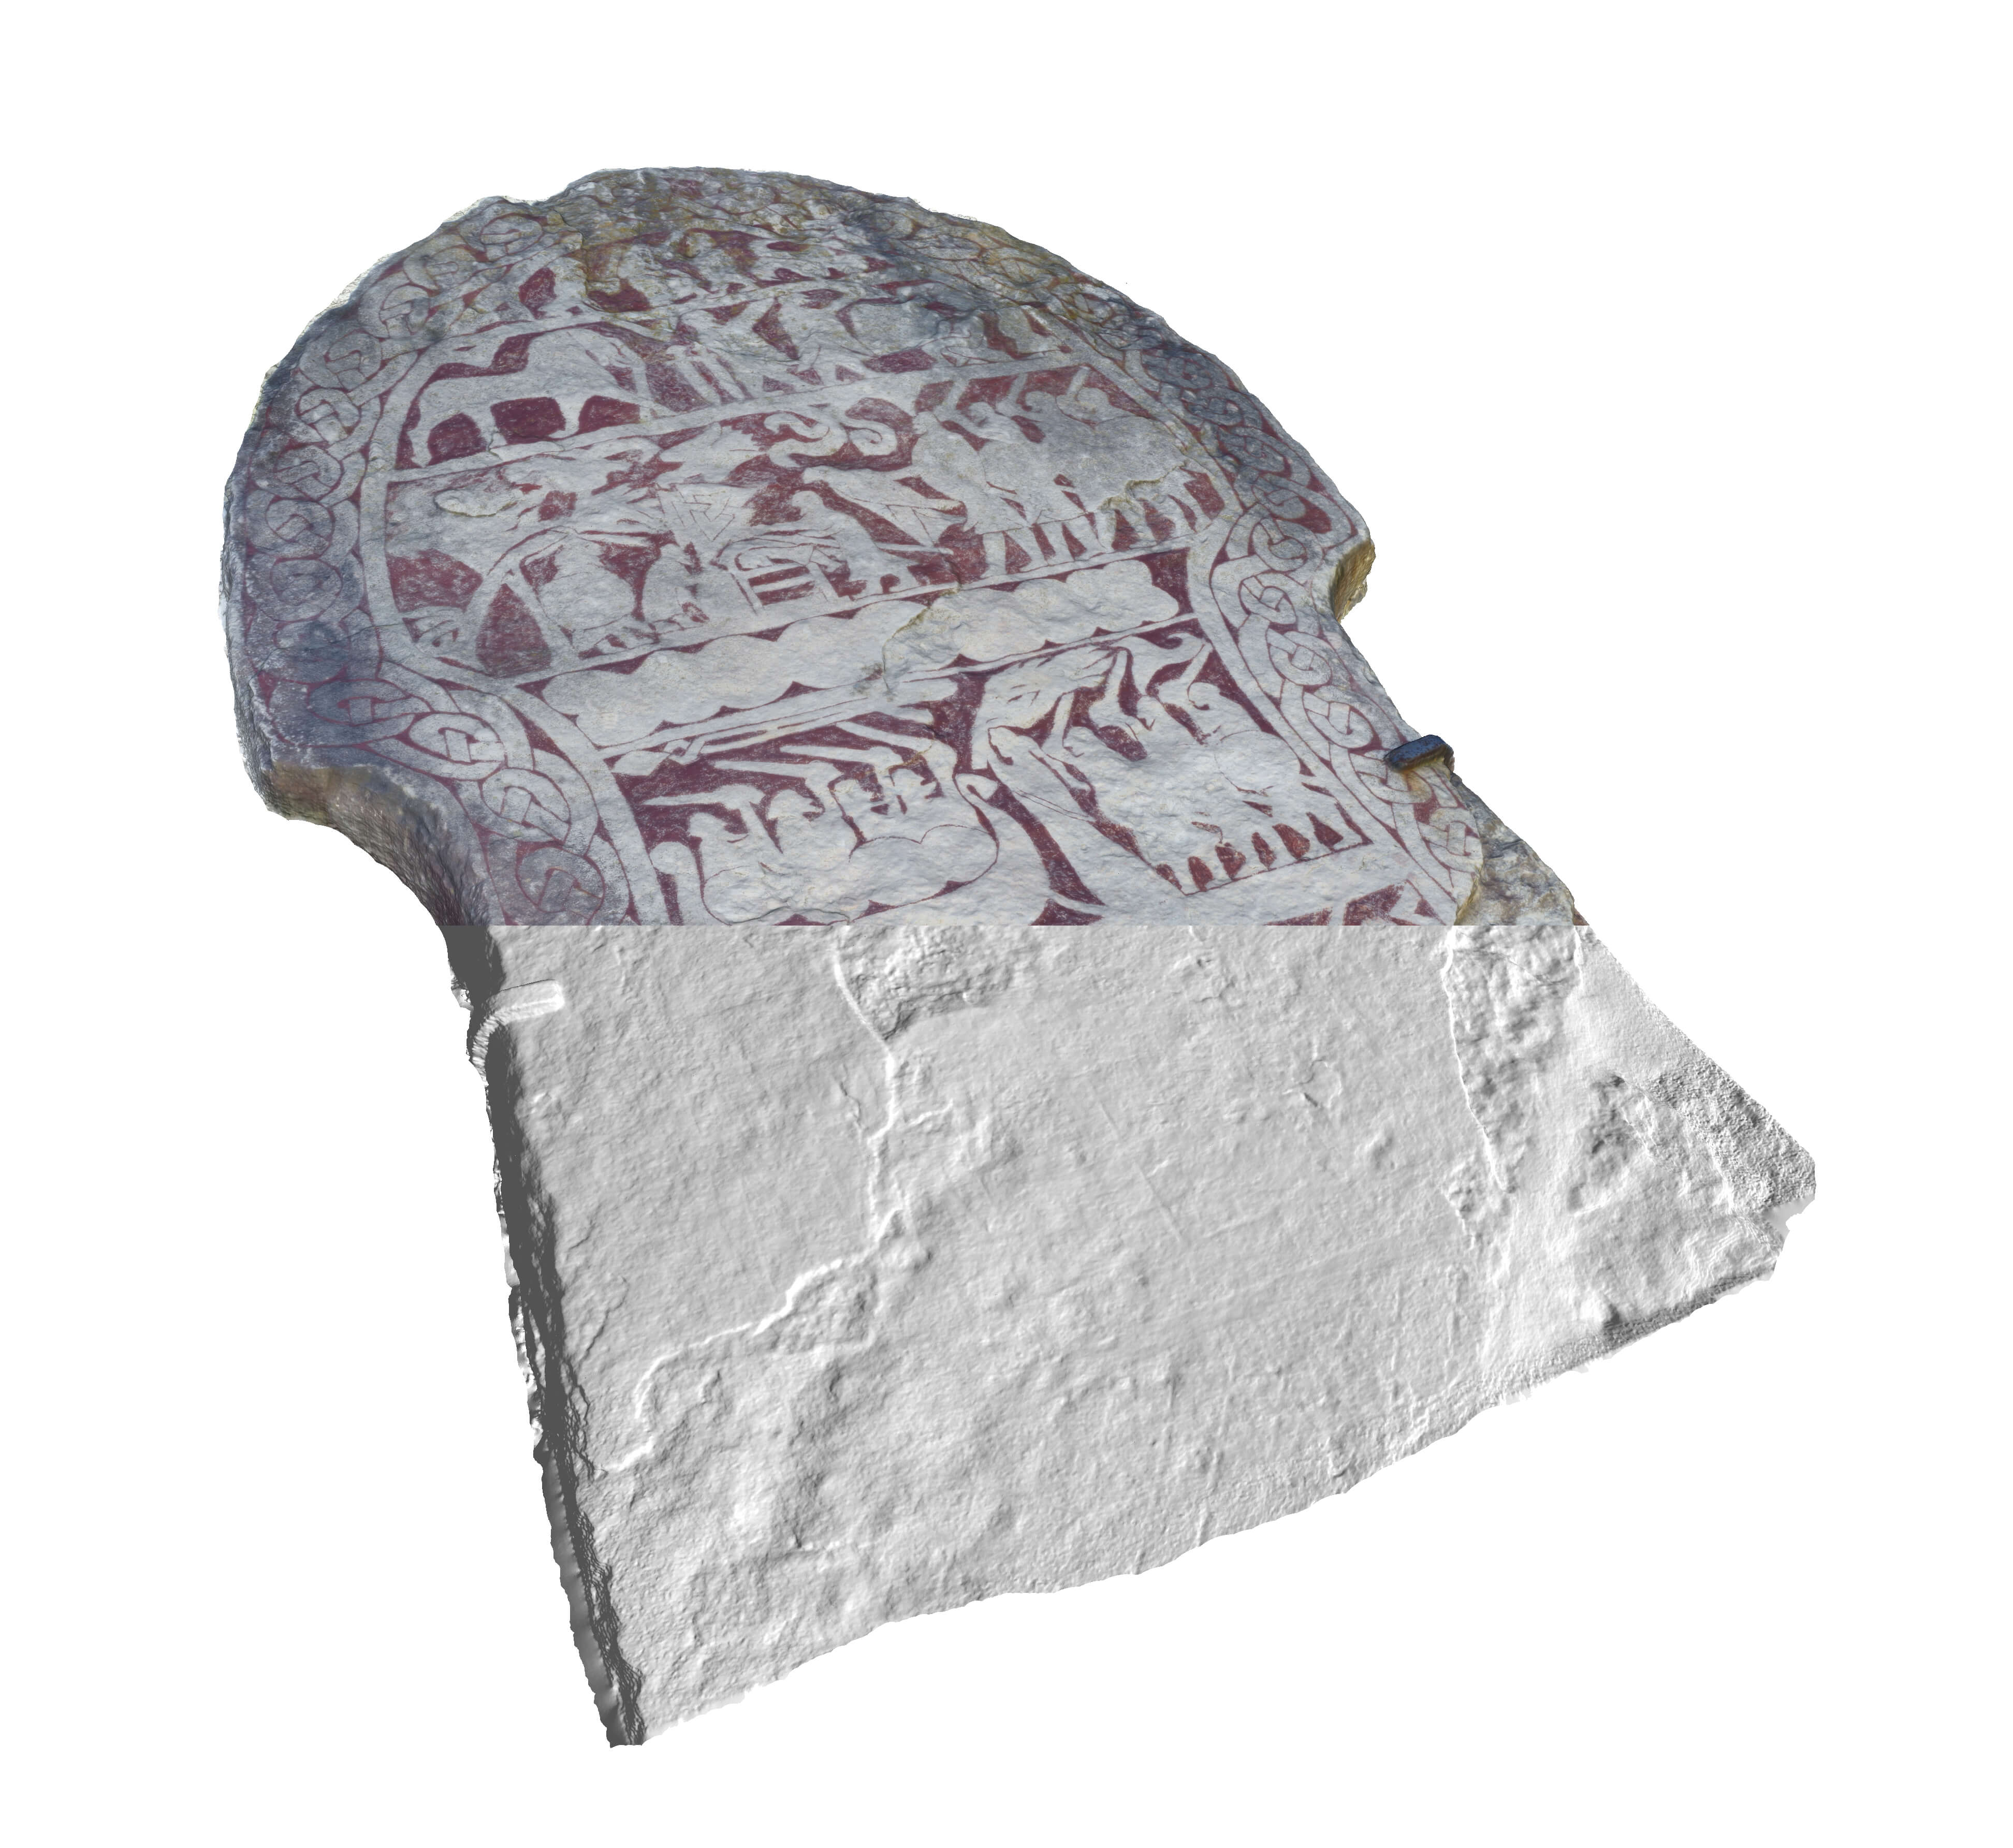 Digitized image of a Gotlandic Picture Stone